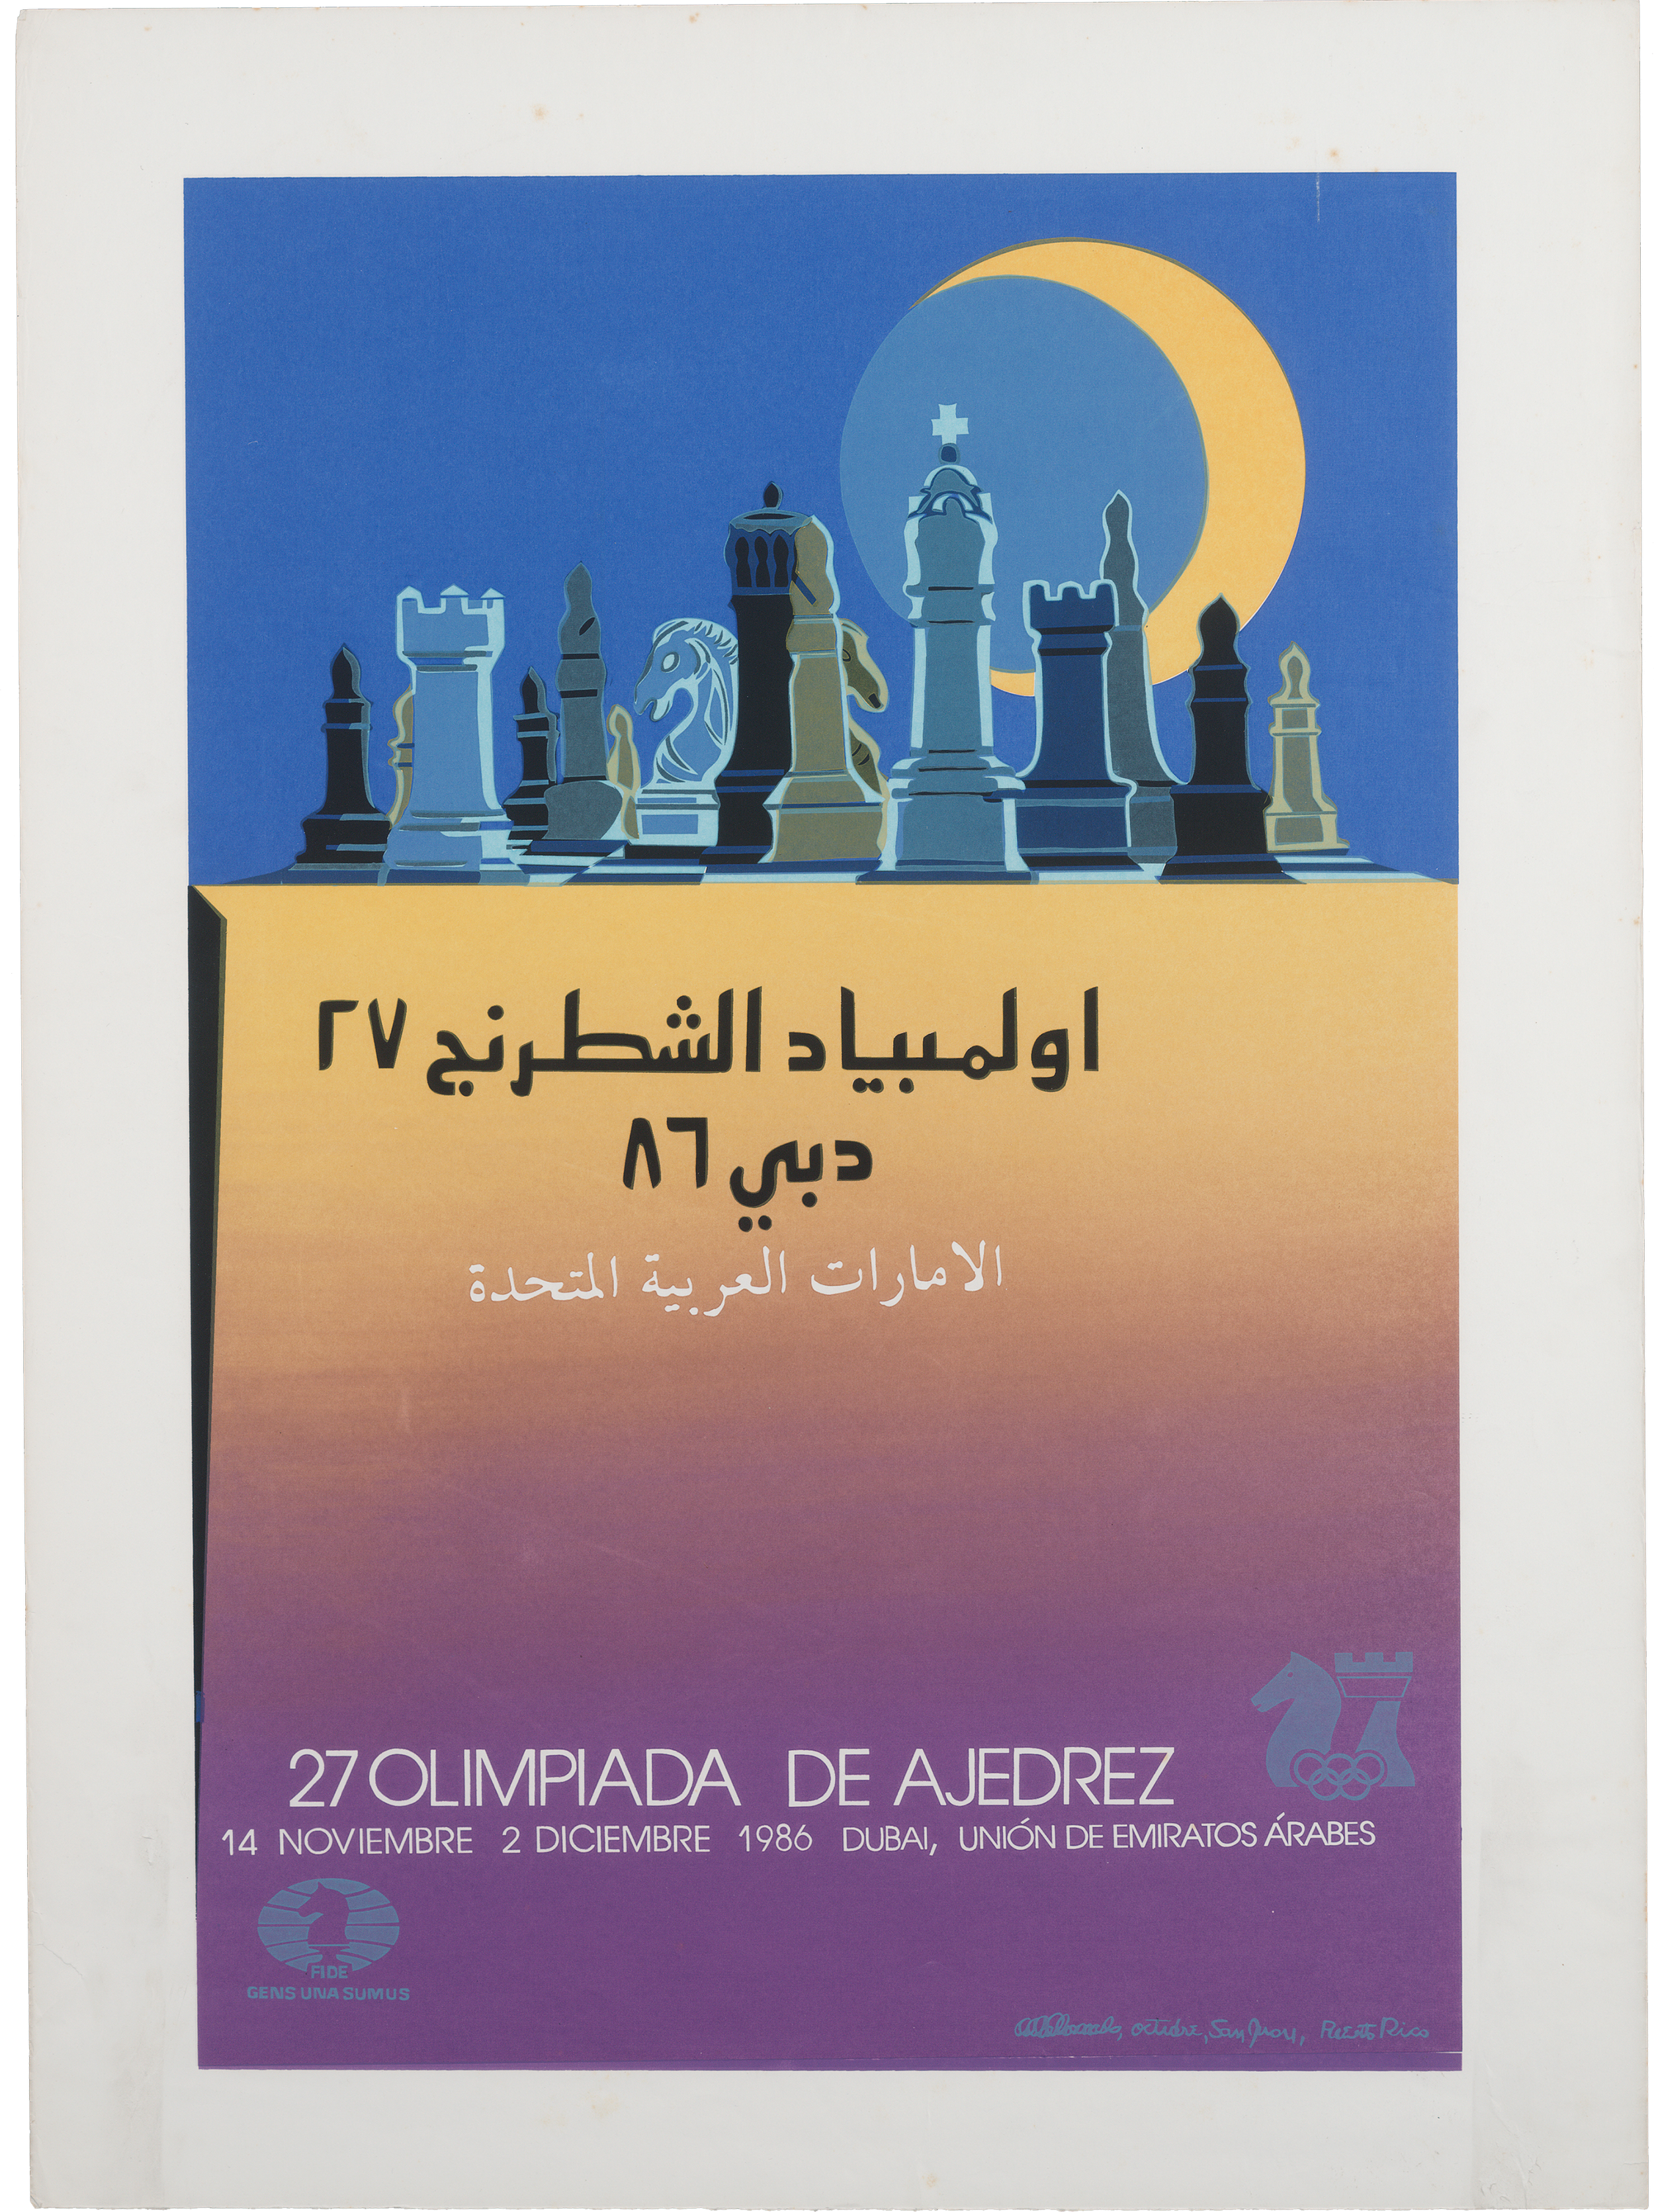 Drawn_Games_Cropped_0005_World-Chess-HoF_72.png